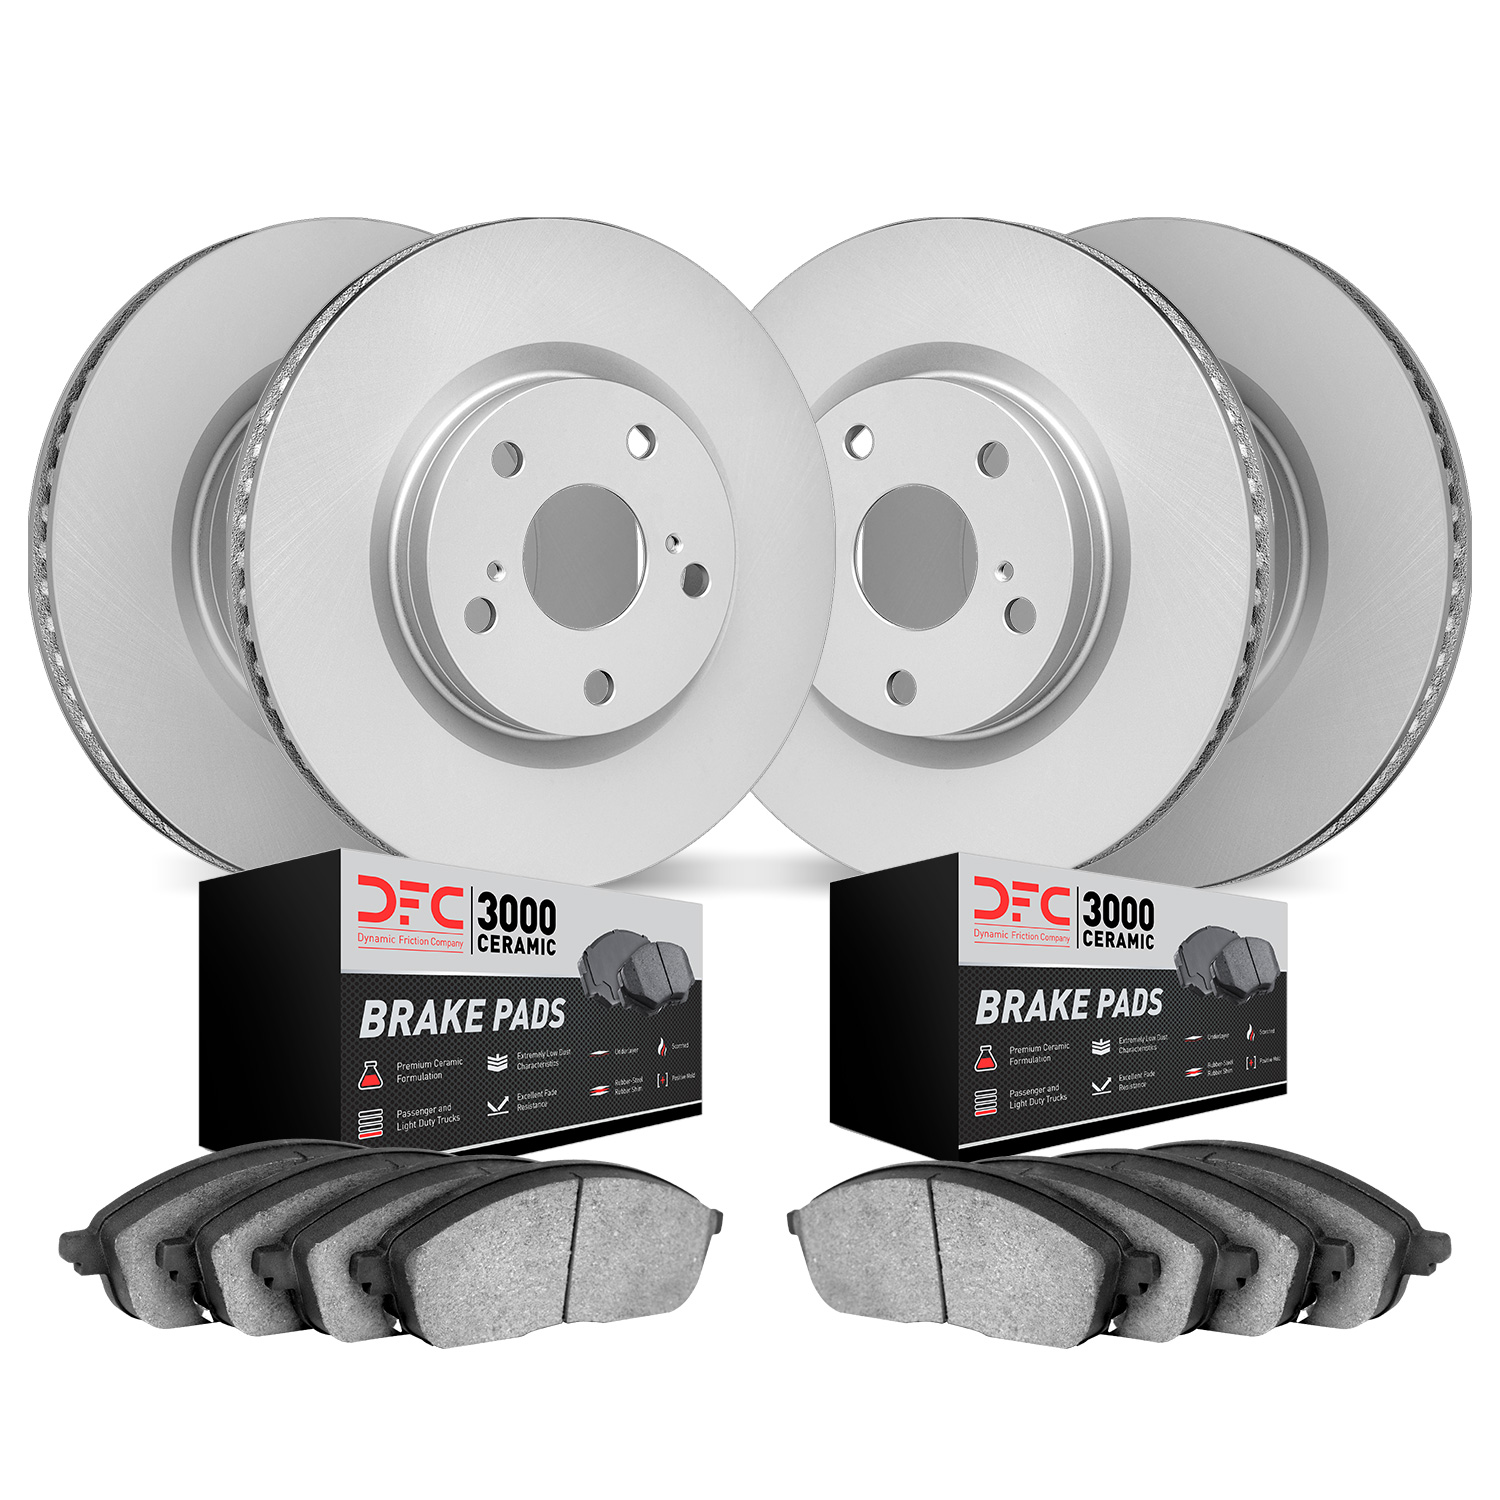 4304-74031 Geospec Brake Rotors with 3000-Series Ceramic Brake Pads Kit, 2008-2013 Audi/Volkswagen, Position: Front and Rear